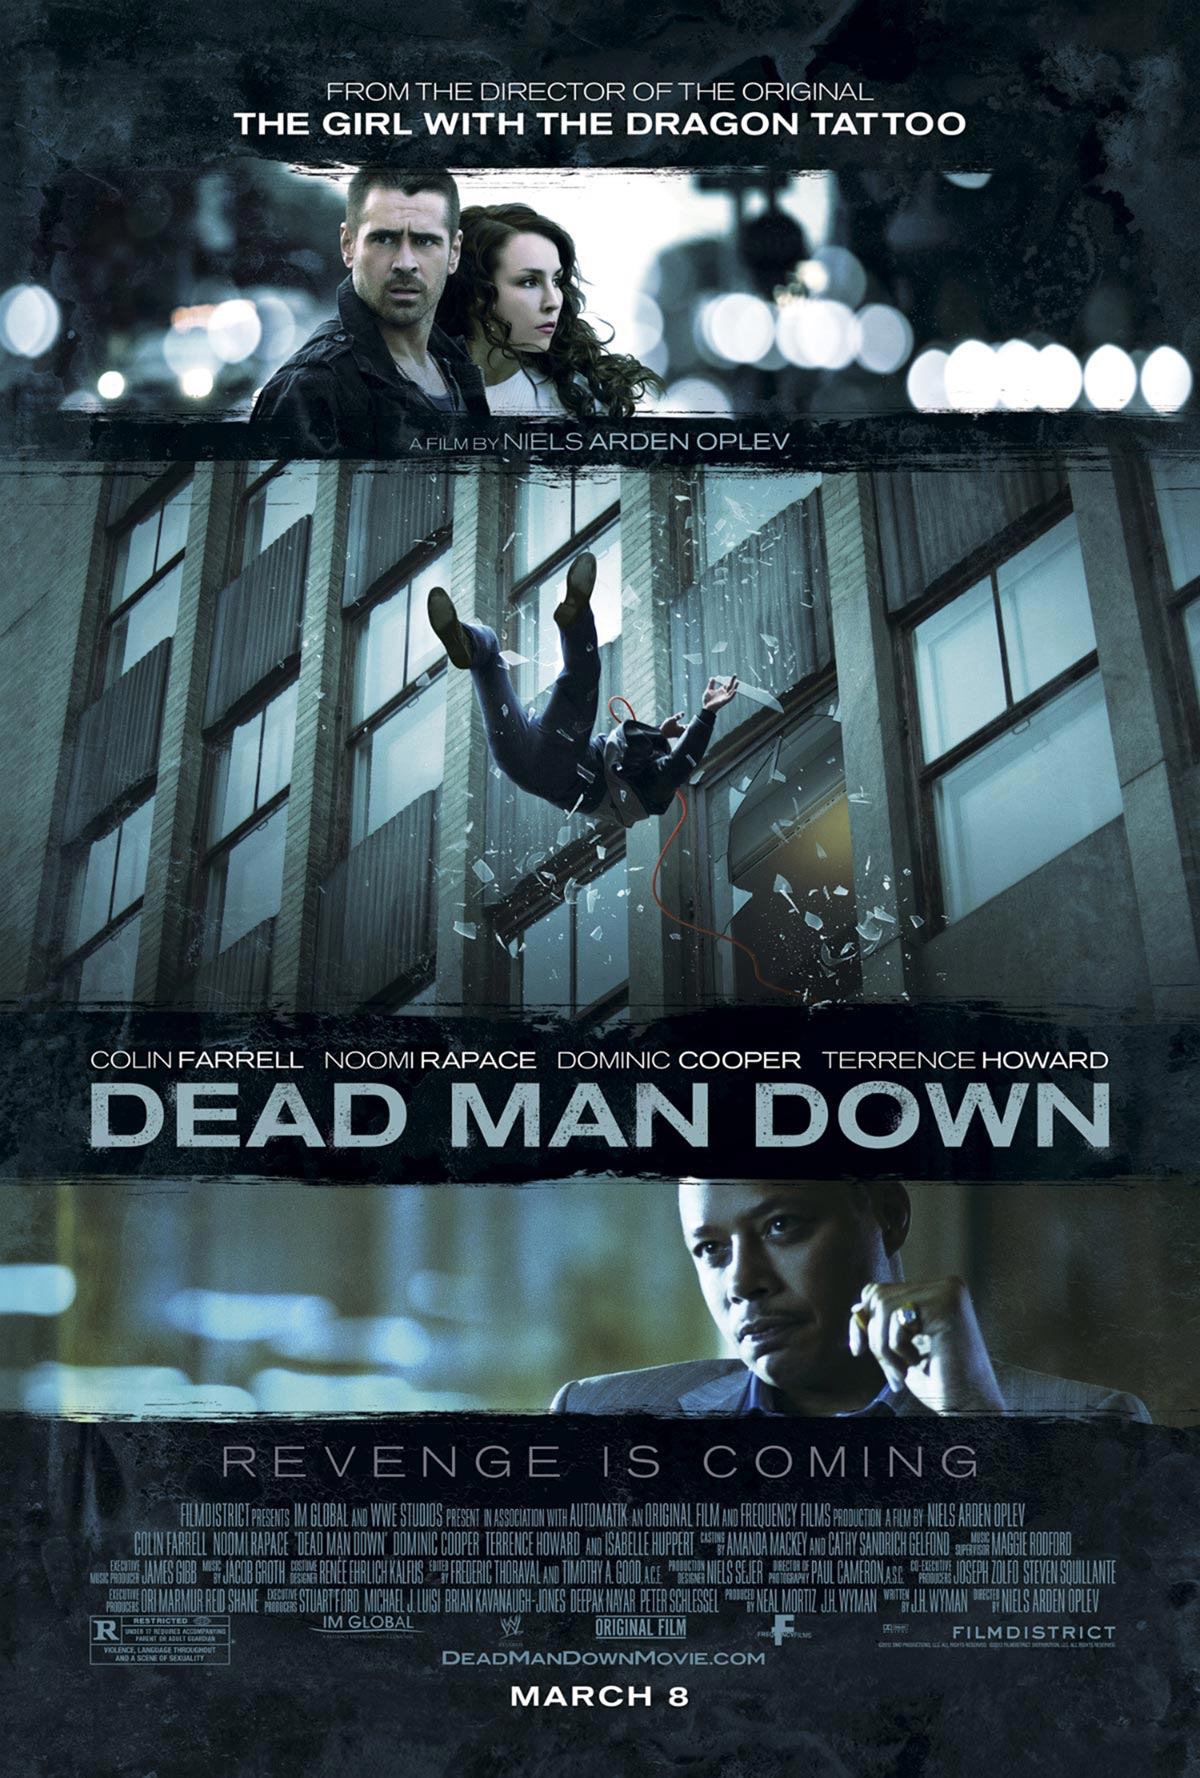 045_dreamogram-iconisus-key-art-movie-poster-dead-man-down_vertical-cover